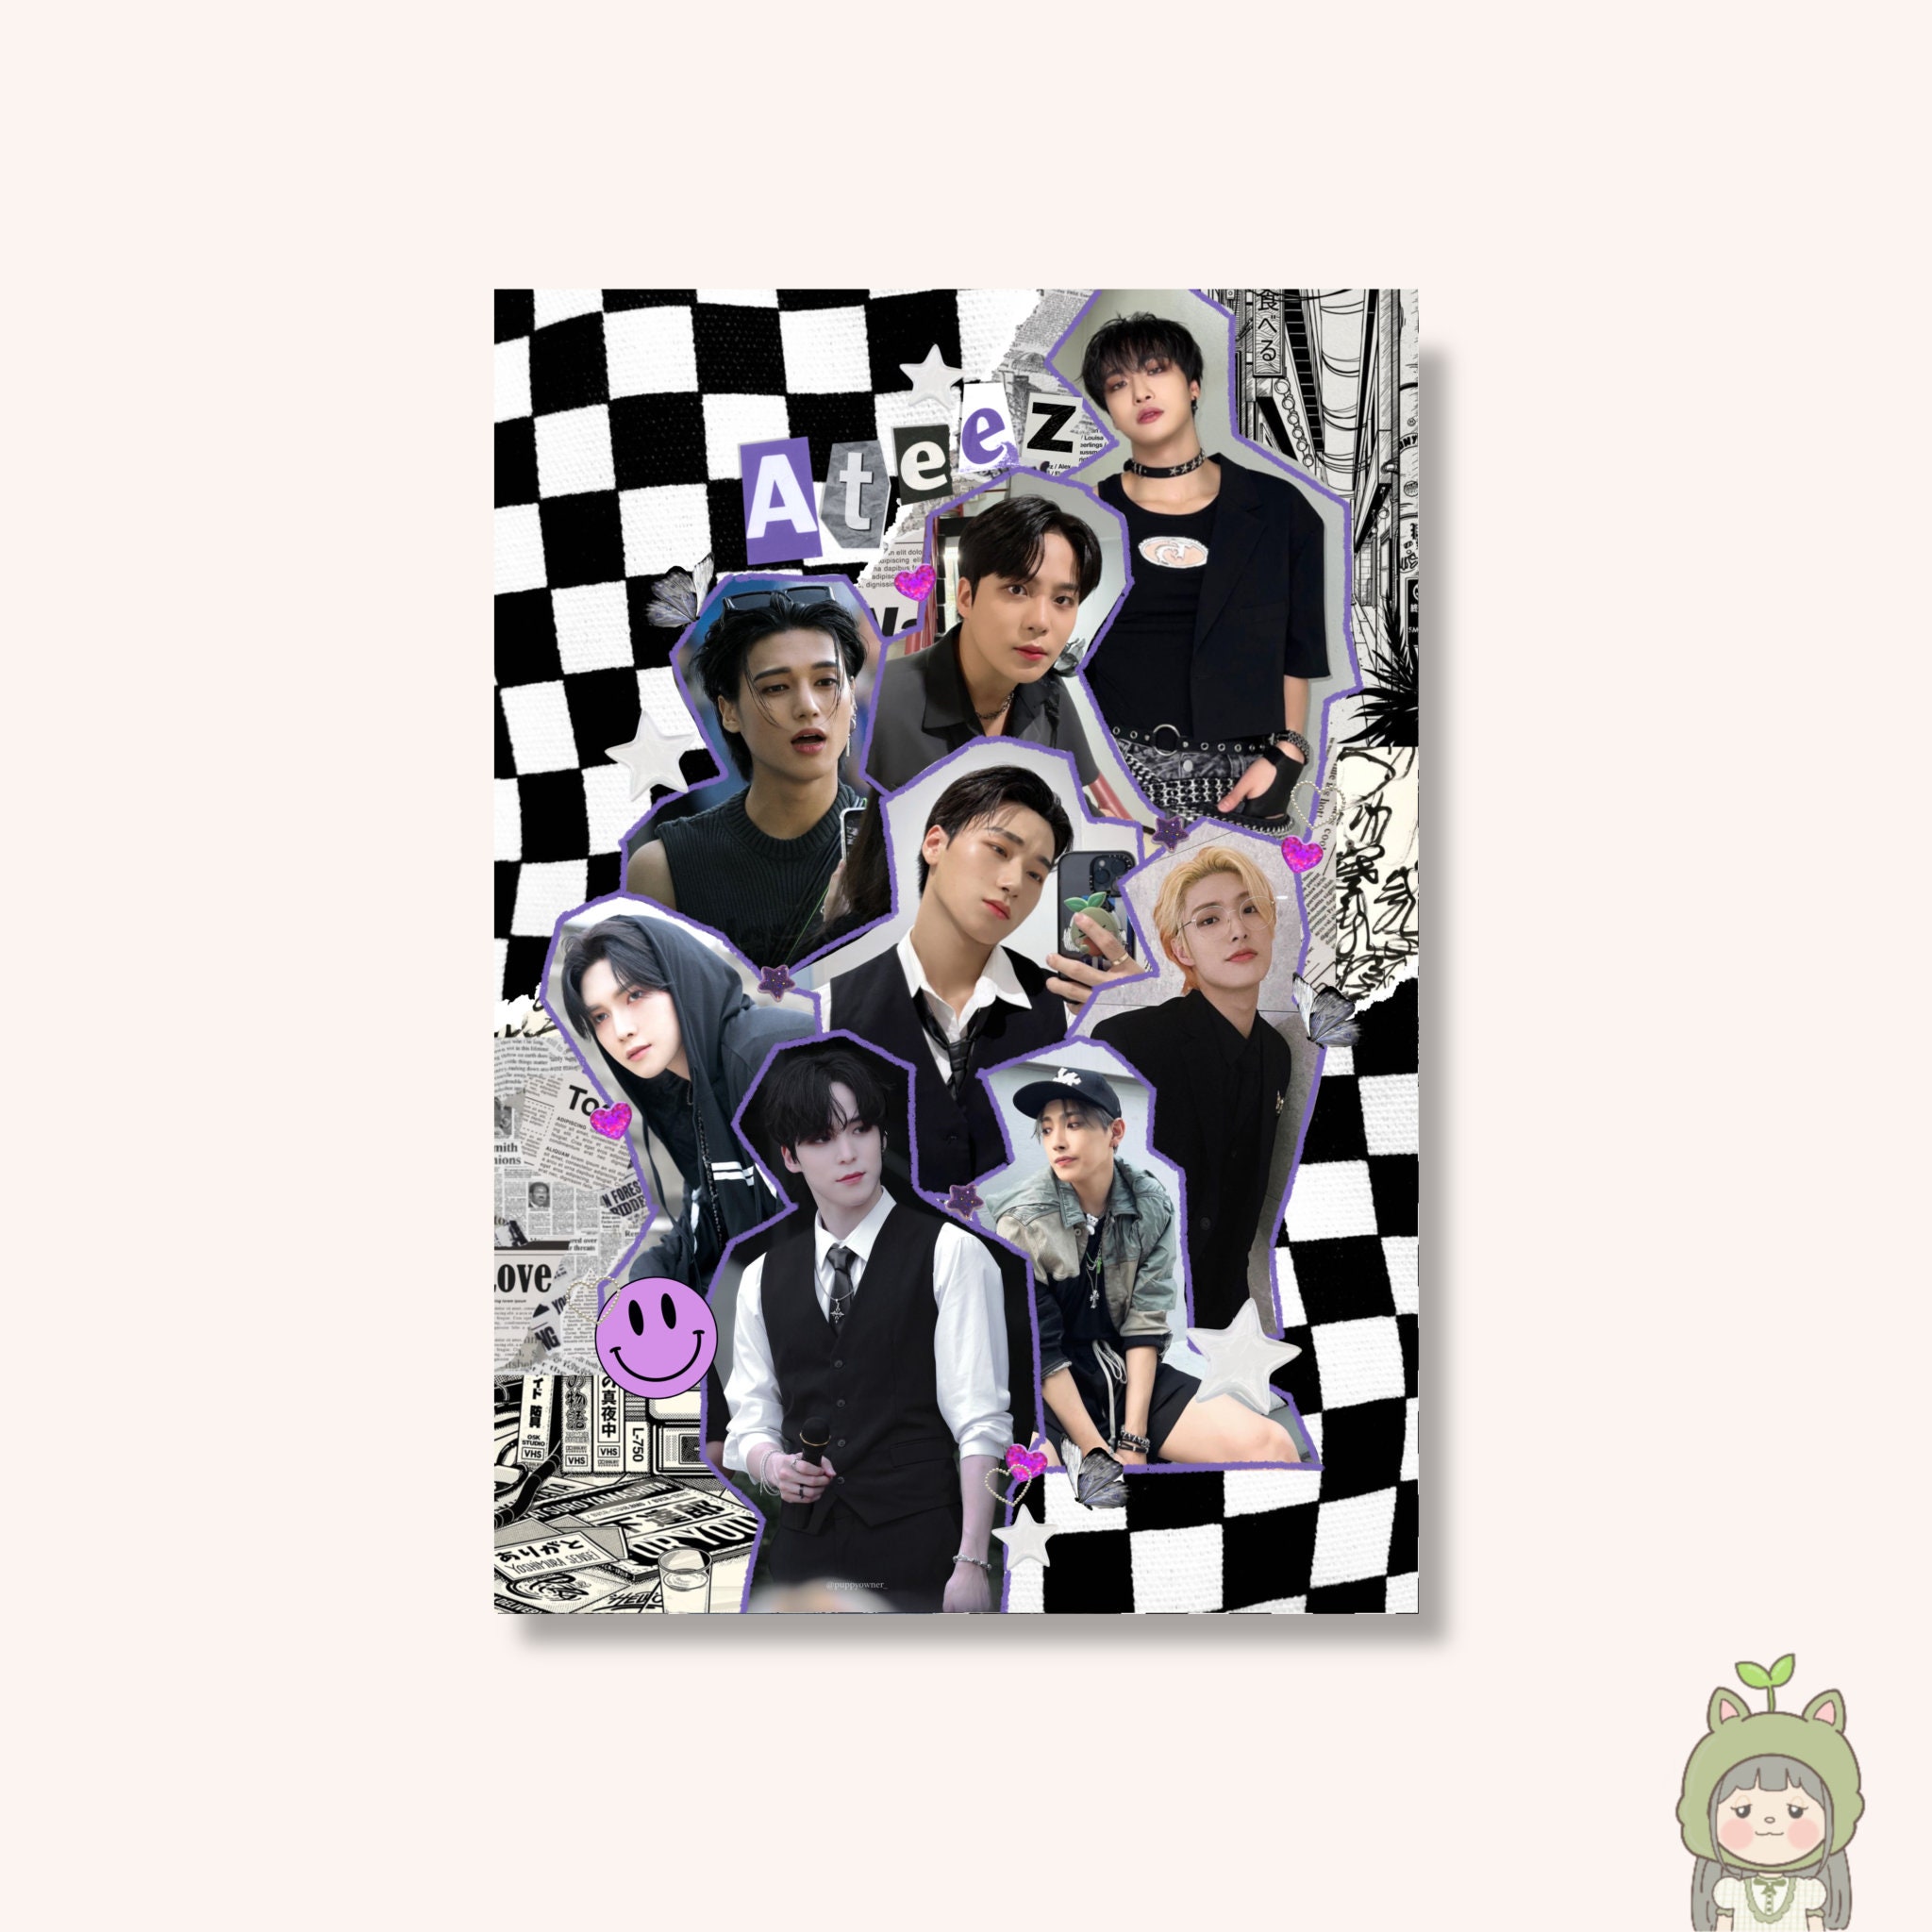 Korean Kpop Girl Group Idol New Jeans Music Album OMG Cover Rabbit Poster  Print Canvas Painting Wall Art Picture Home Room Decor